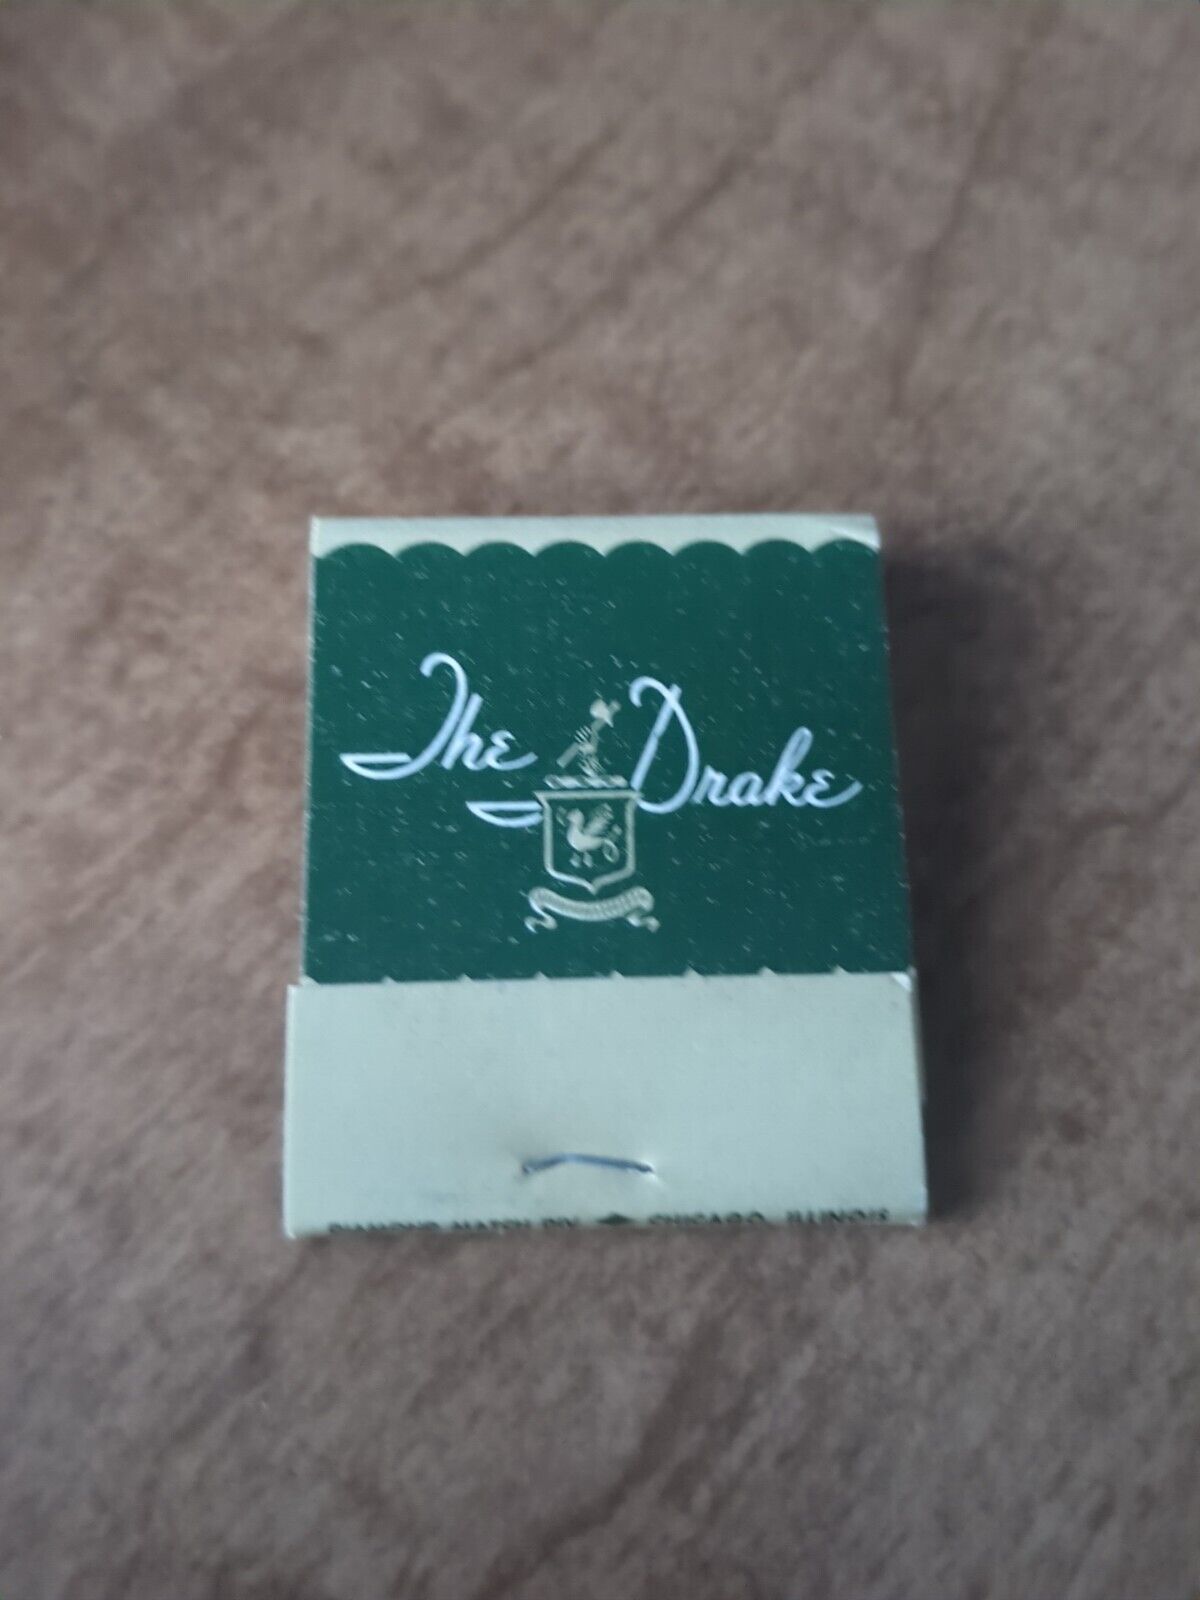 Vintage 1960s Matchbook The Drake Hotel Chicago Aquila Non Capit Muscas